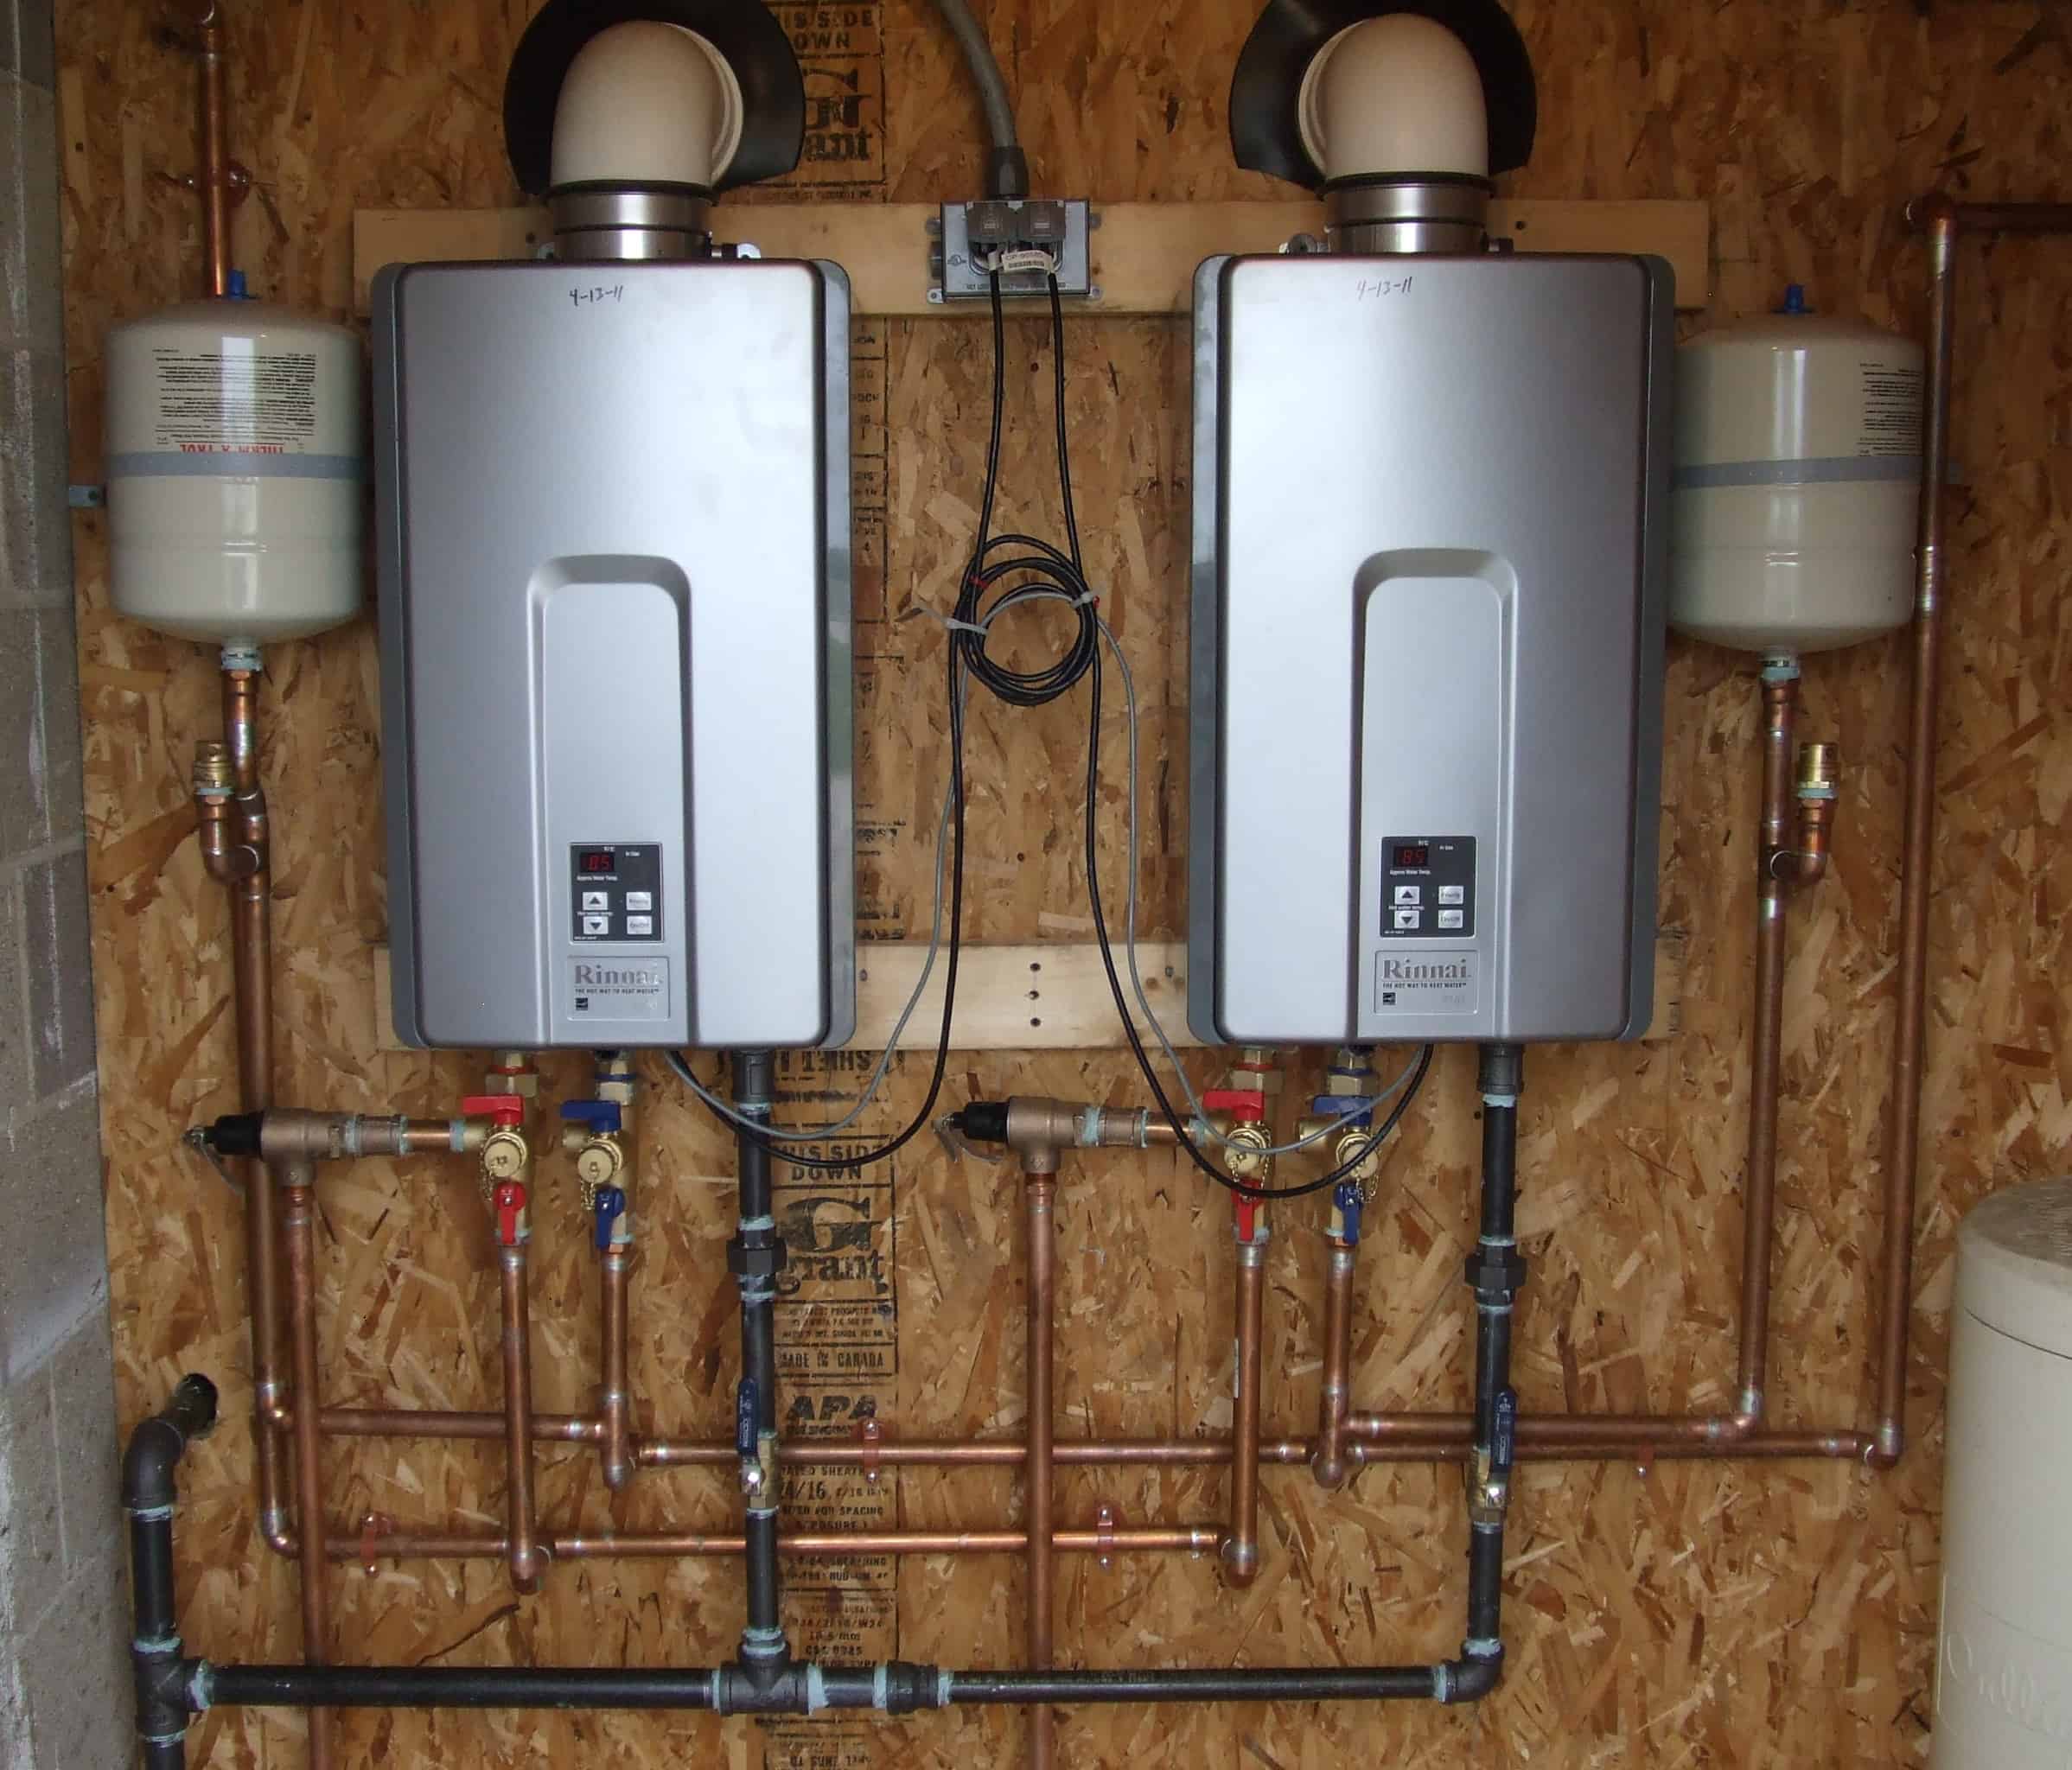 Water Heater Repair, Install or Upgrade to Tankless! 